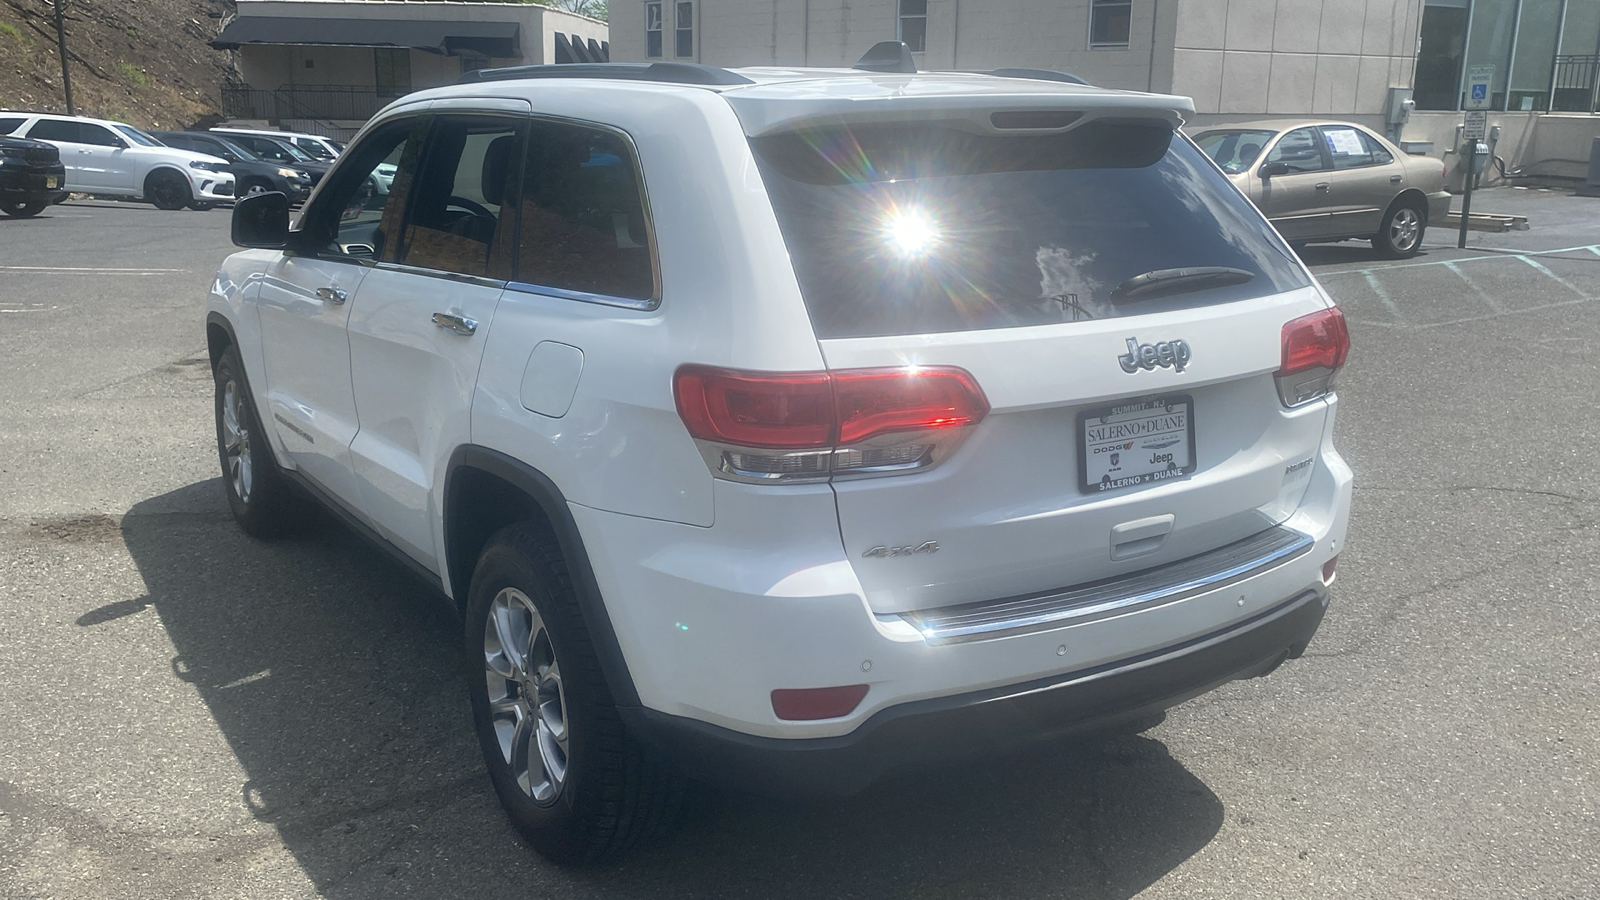 2015 Jeep Grand Cherokee Limited 25